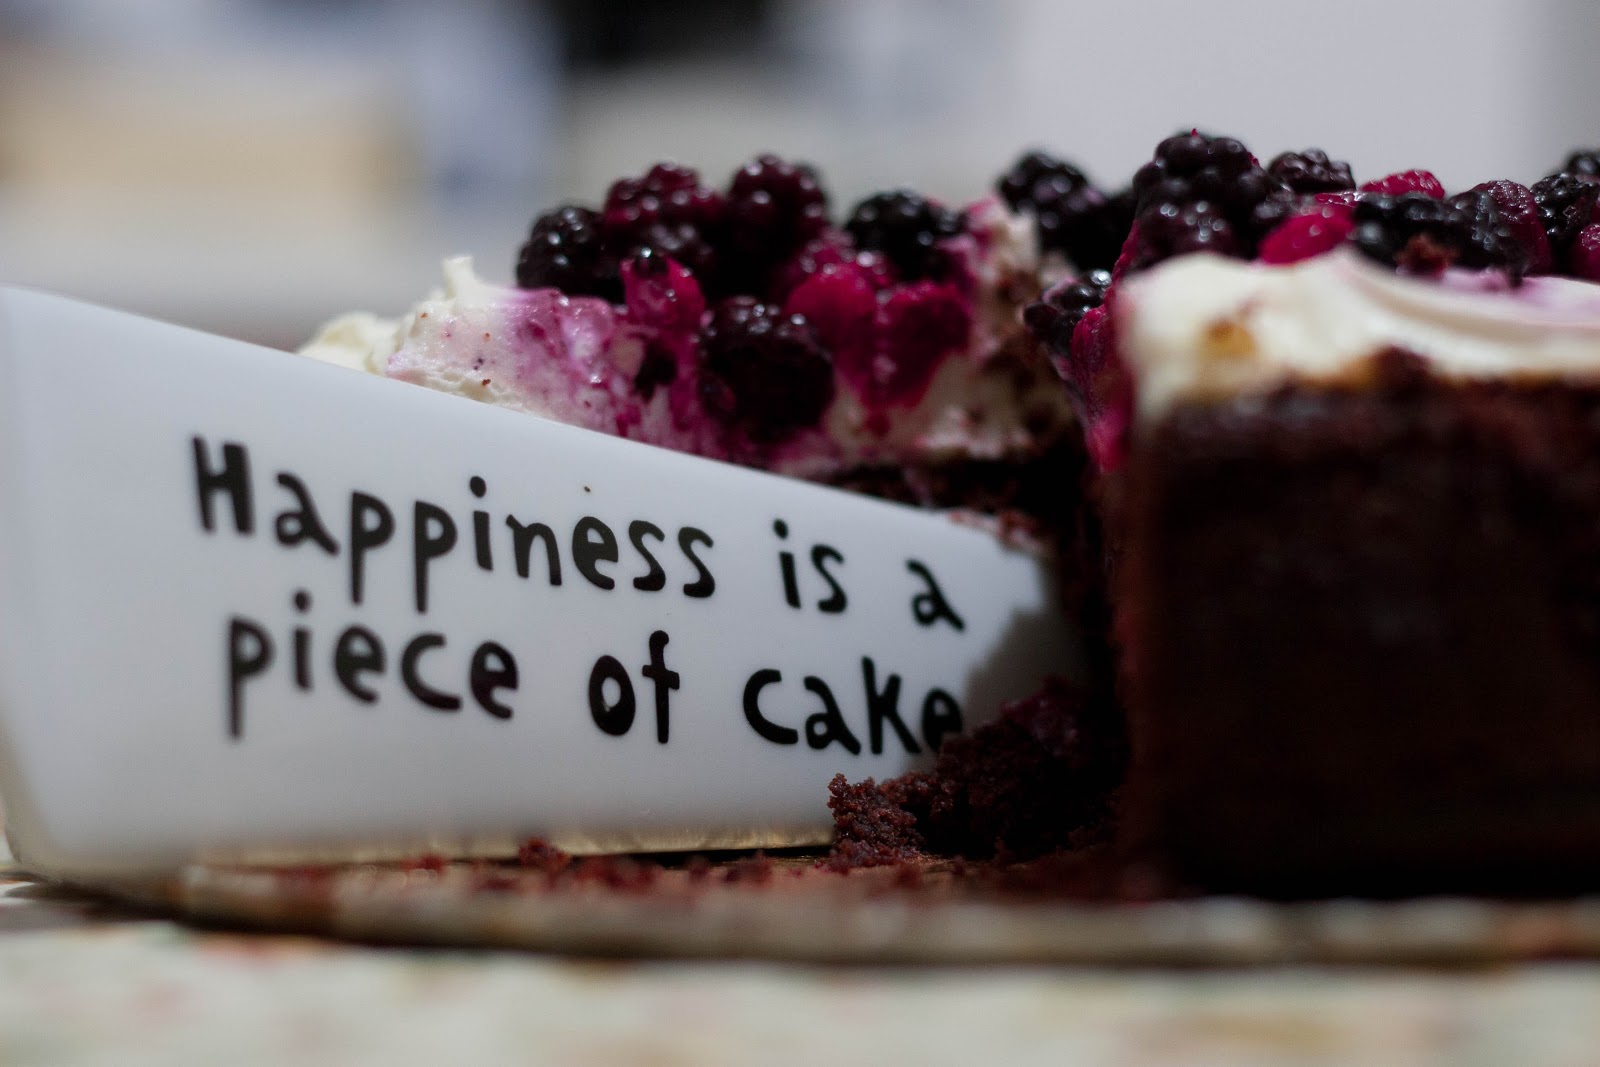 happiness is a piece of cake written on a knife cutting cake